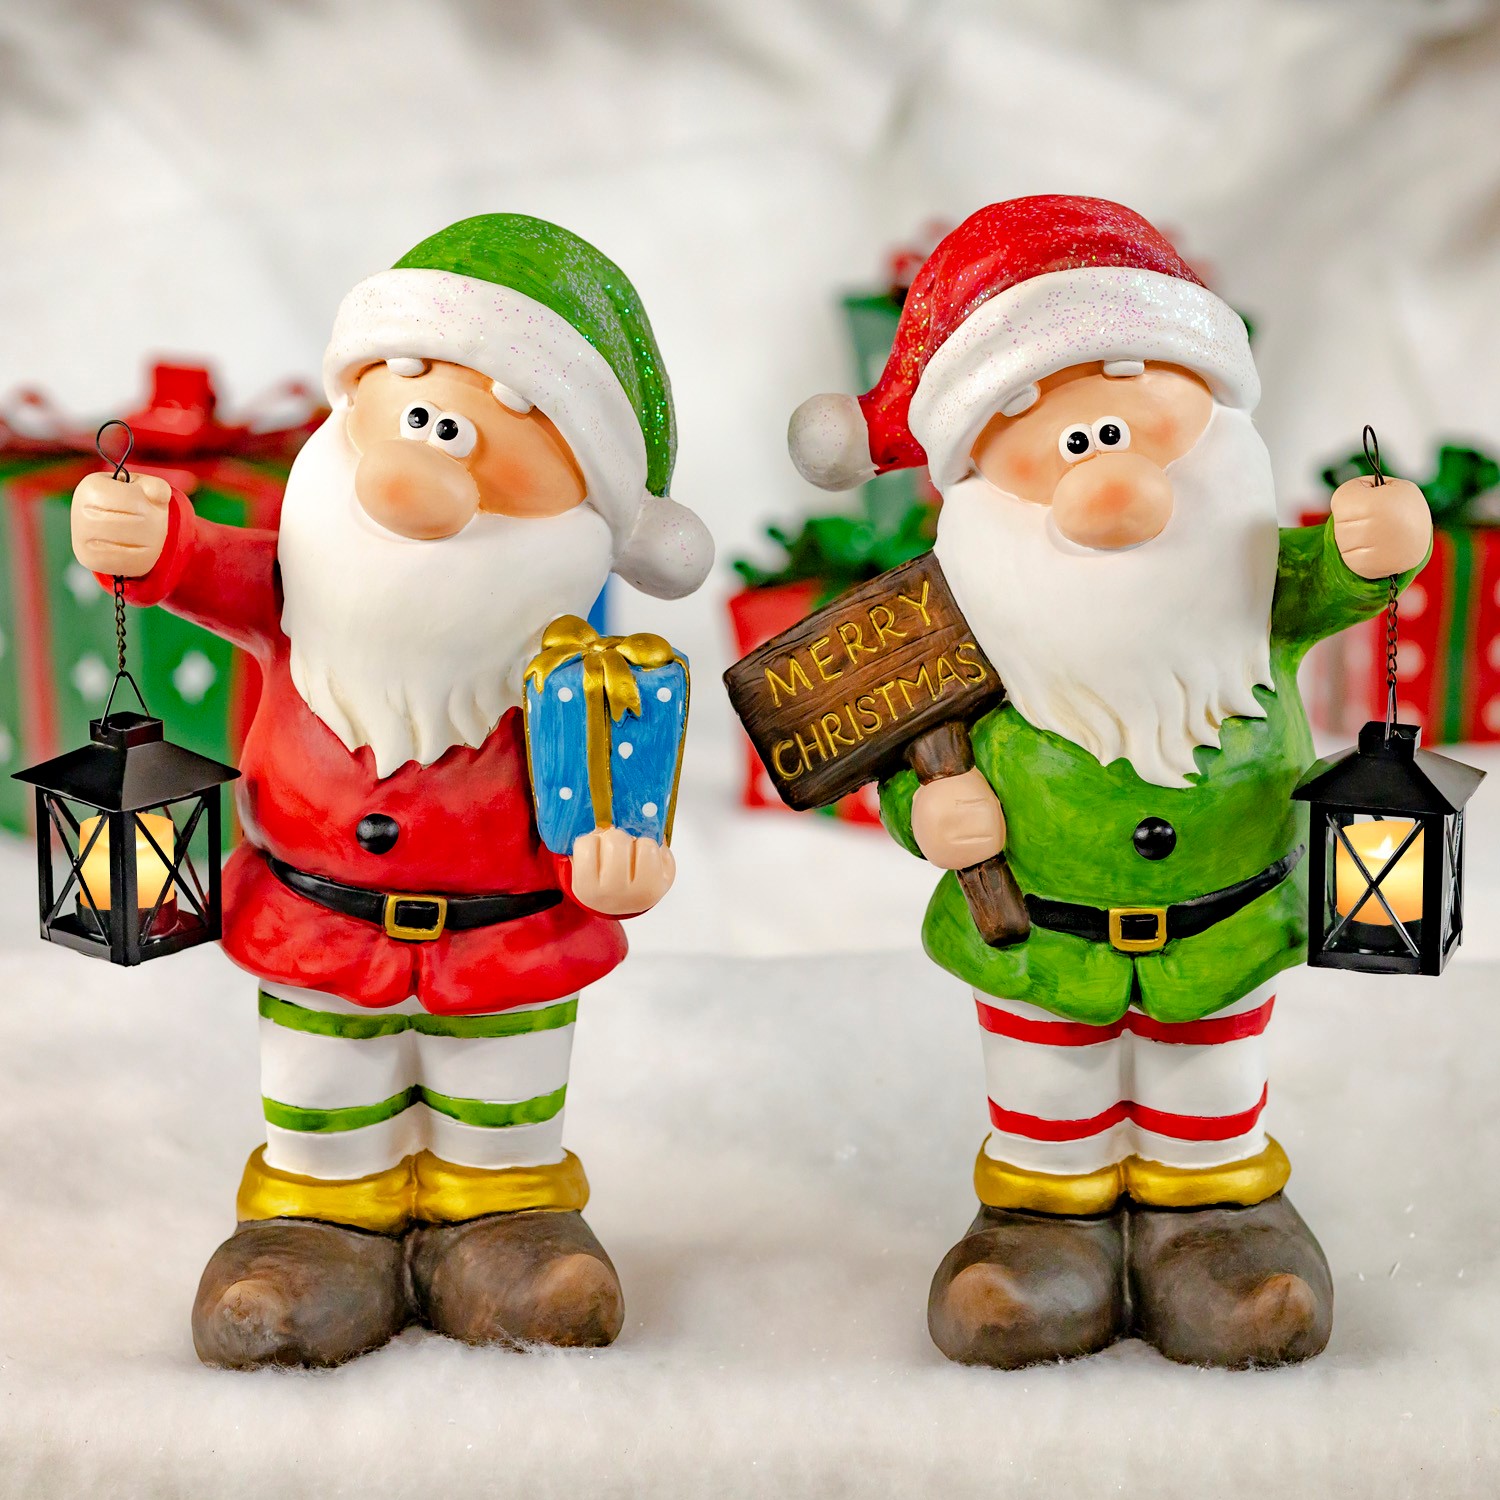 Christmas Gnomes Christmas Gnome Christmas Home Decor Gnome Christmas Decorations Christmas Gnomes Decorations The Holiday Aisle